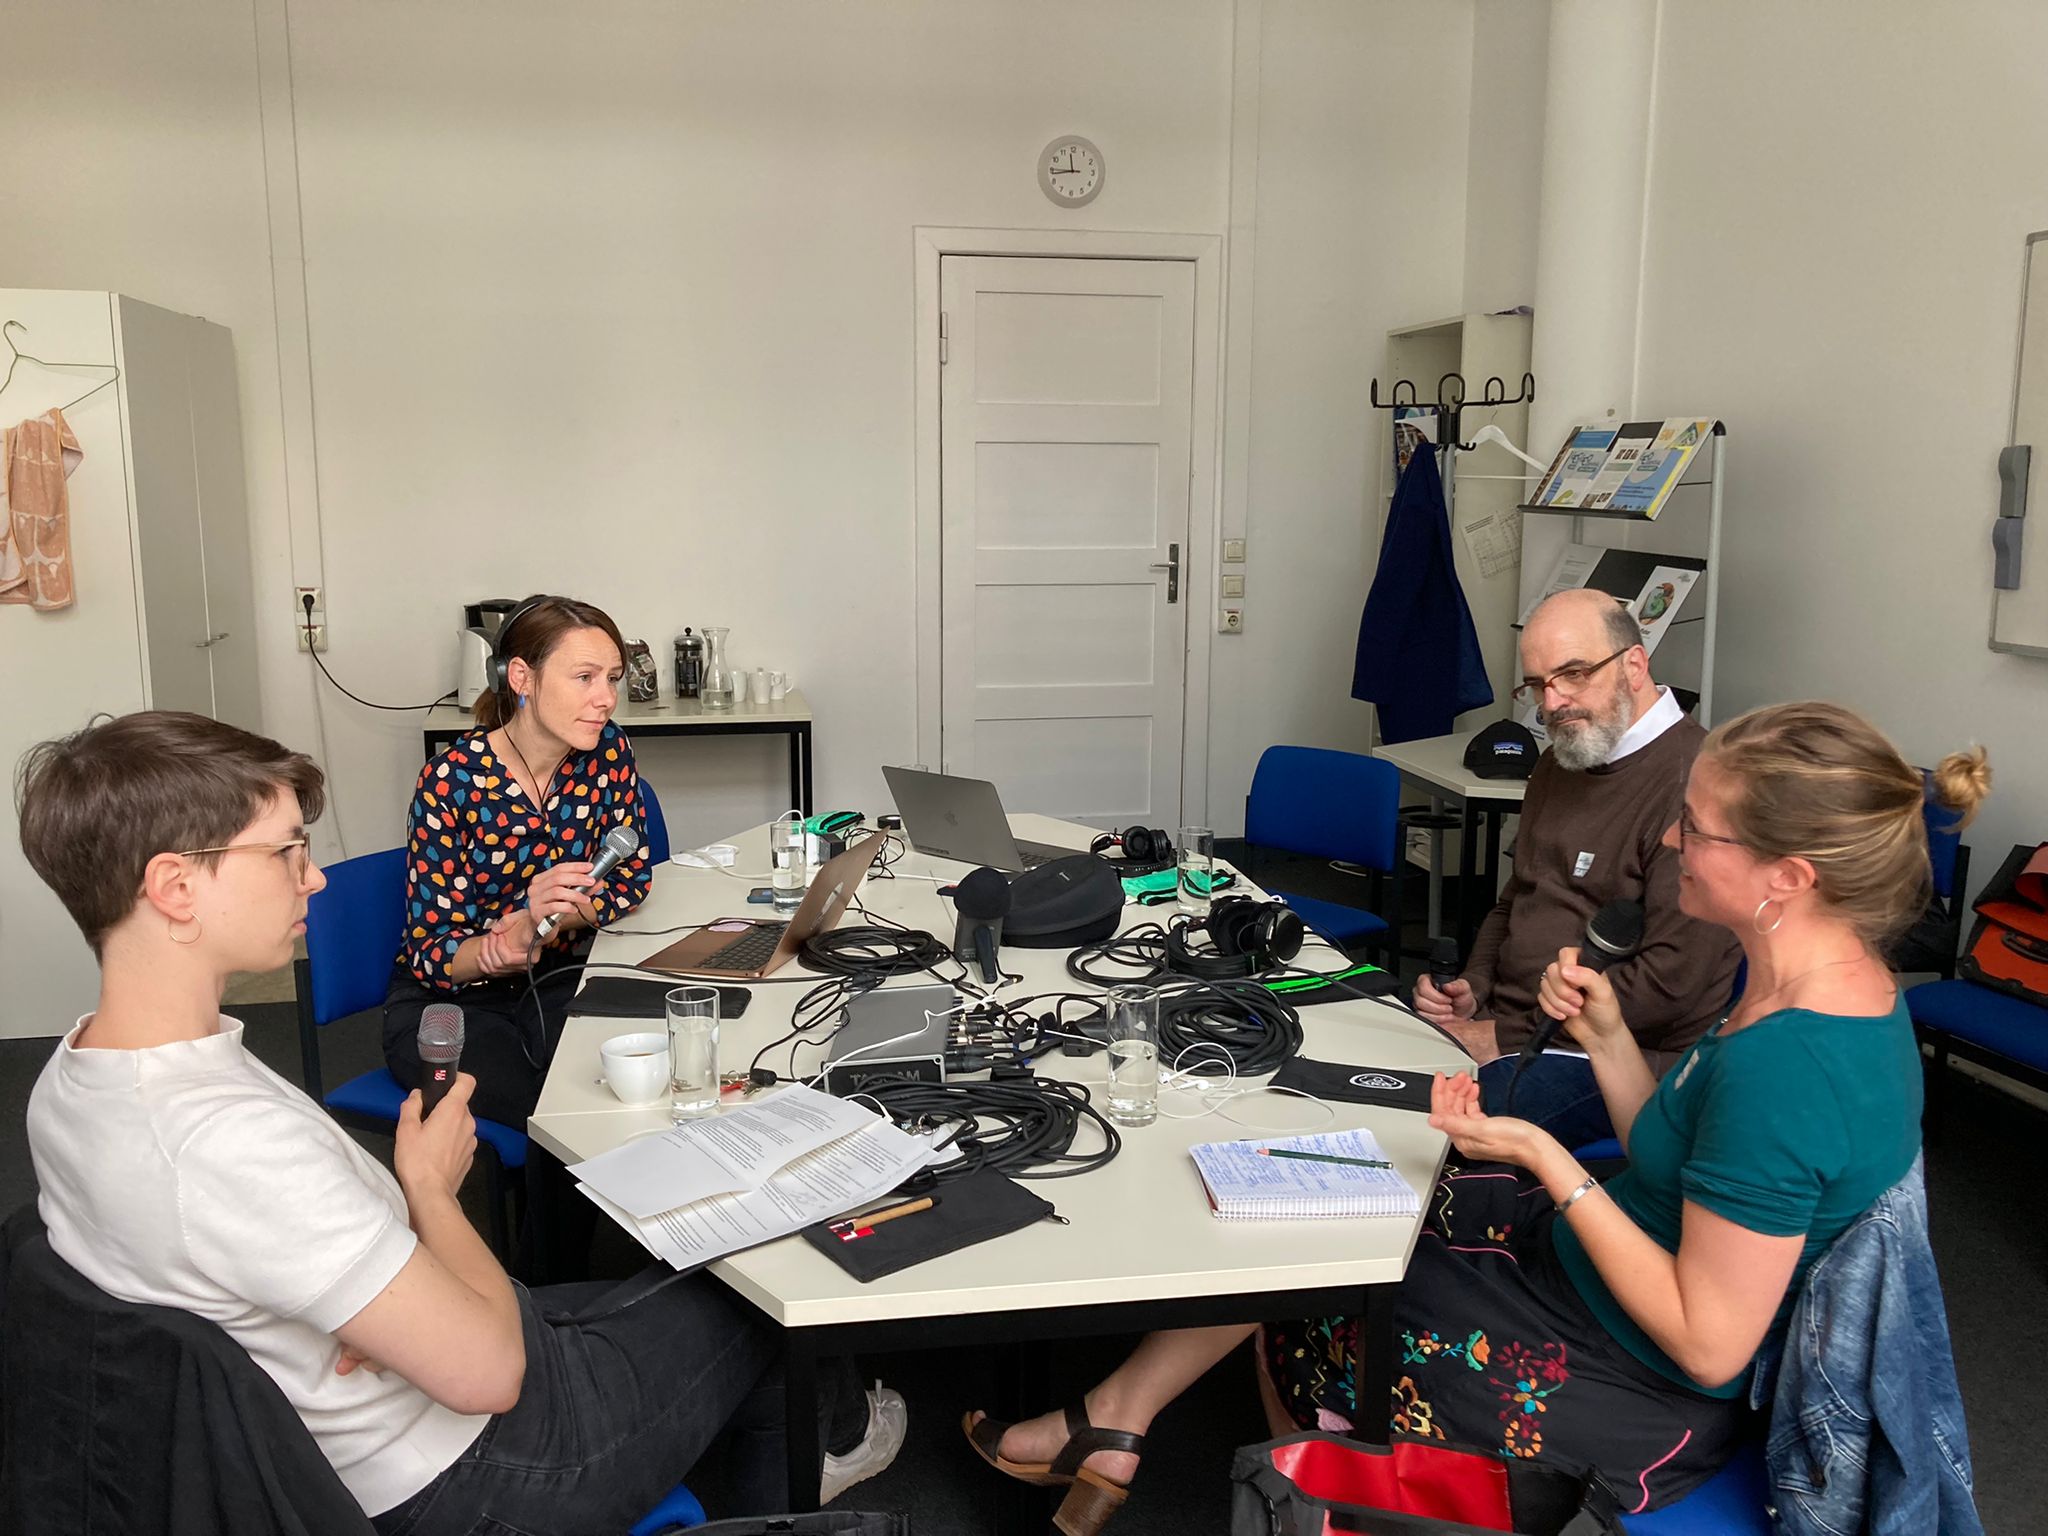 Discussing in the episode (from left to right): Dr. Elisabeth Heyne from the Museum für Naturkunde Berlin, moderator Nancy Fischer, Dr. Patrick Eiden-Offe from the Leibniz Center for Literary and Cultural Research and Dr. Judith Nora Hardt from the Centre Marc Bloch. 